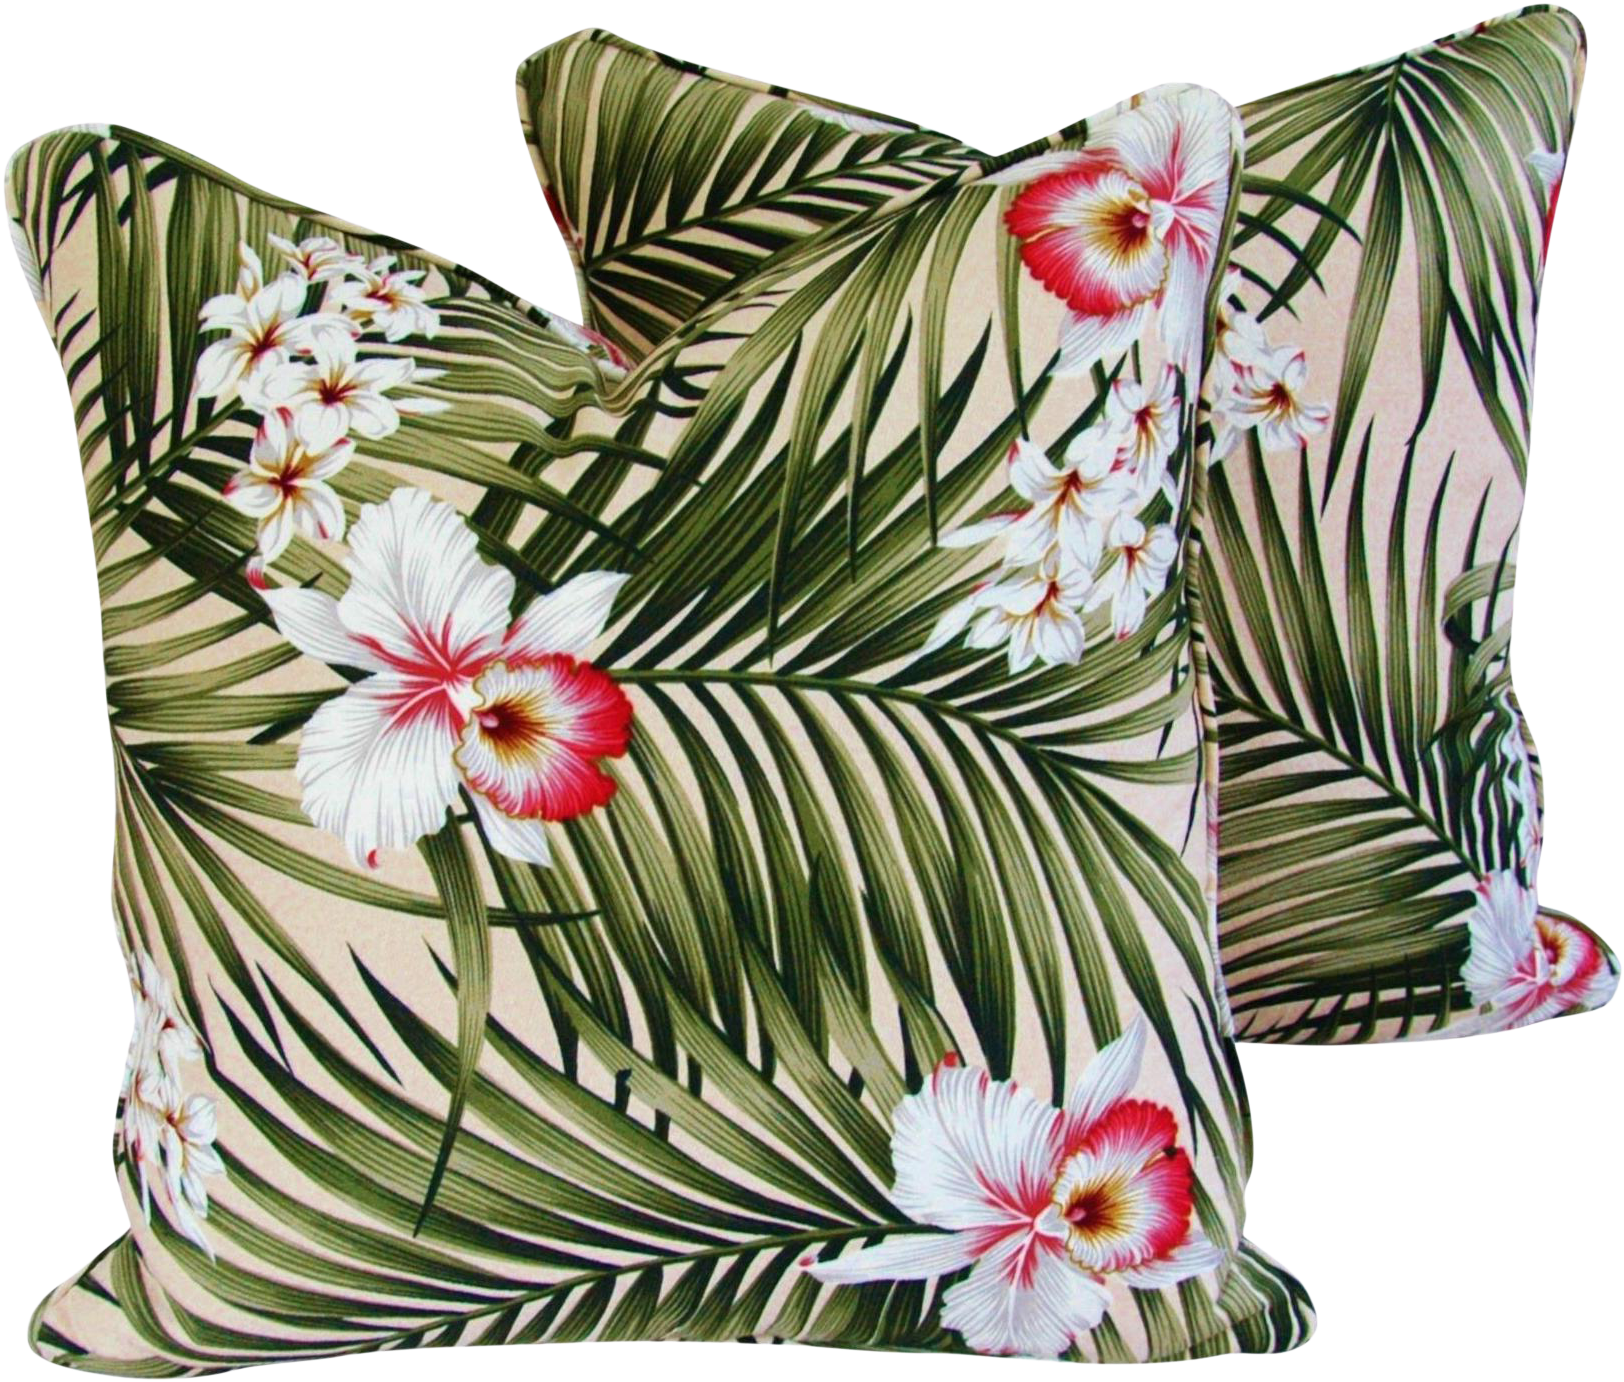 Tropical Lush Palm Leaf & Orchid Feather/down Pillows - Spice Islands Rocking Chair Upholstery: Botanical Fern (1703x1428)